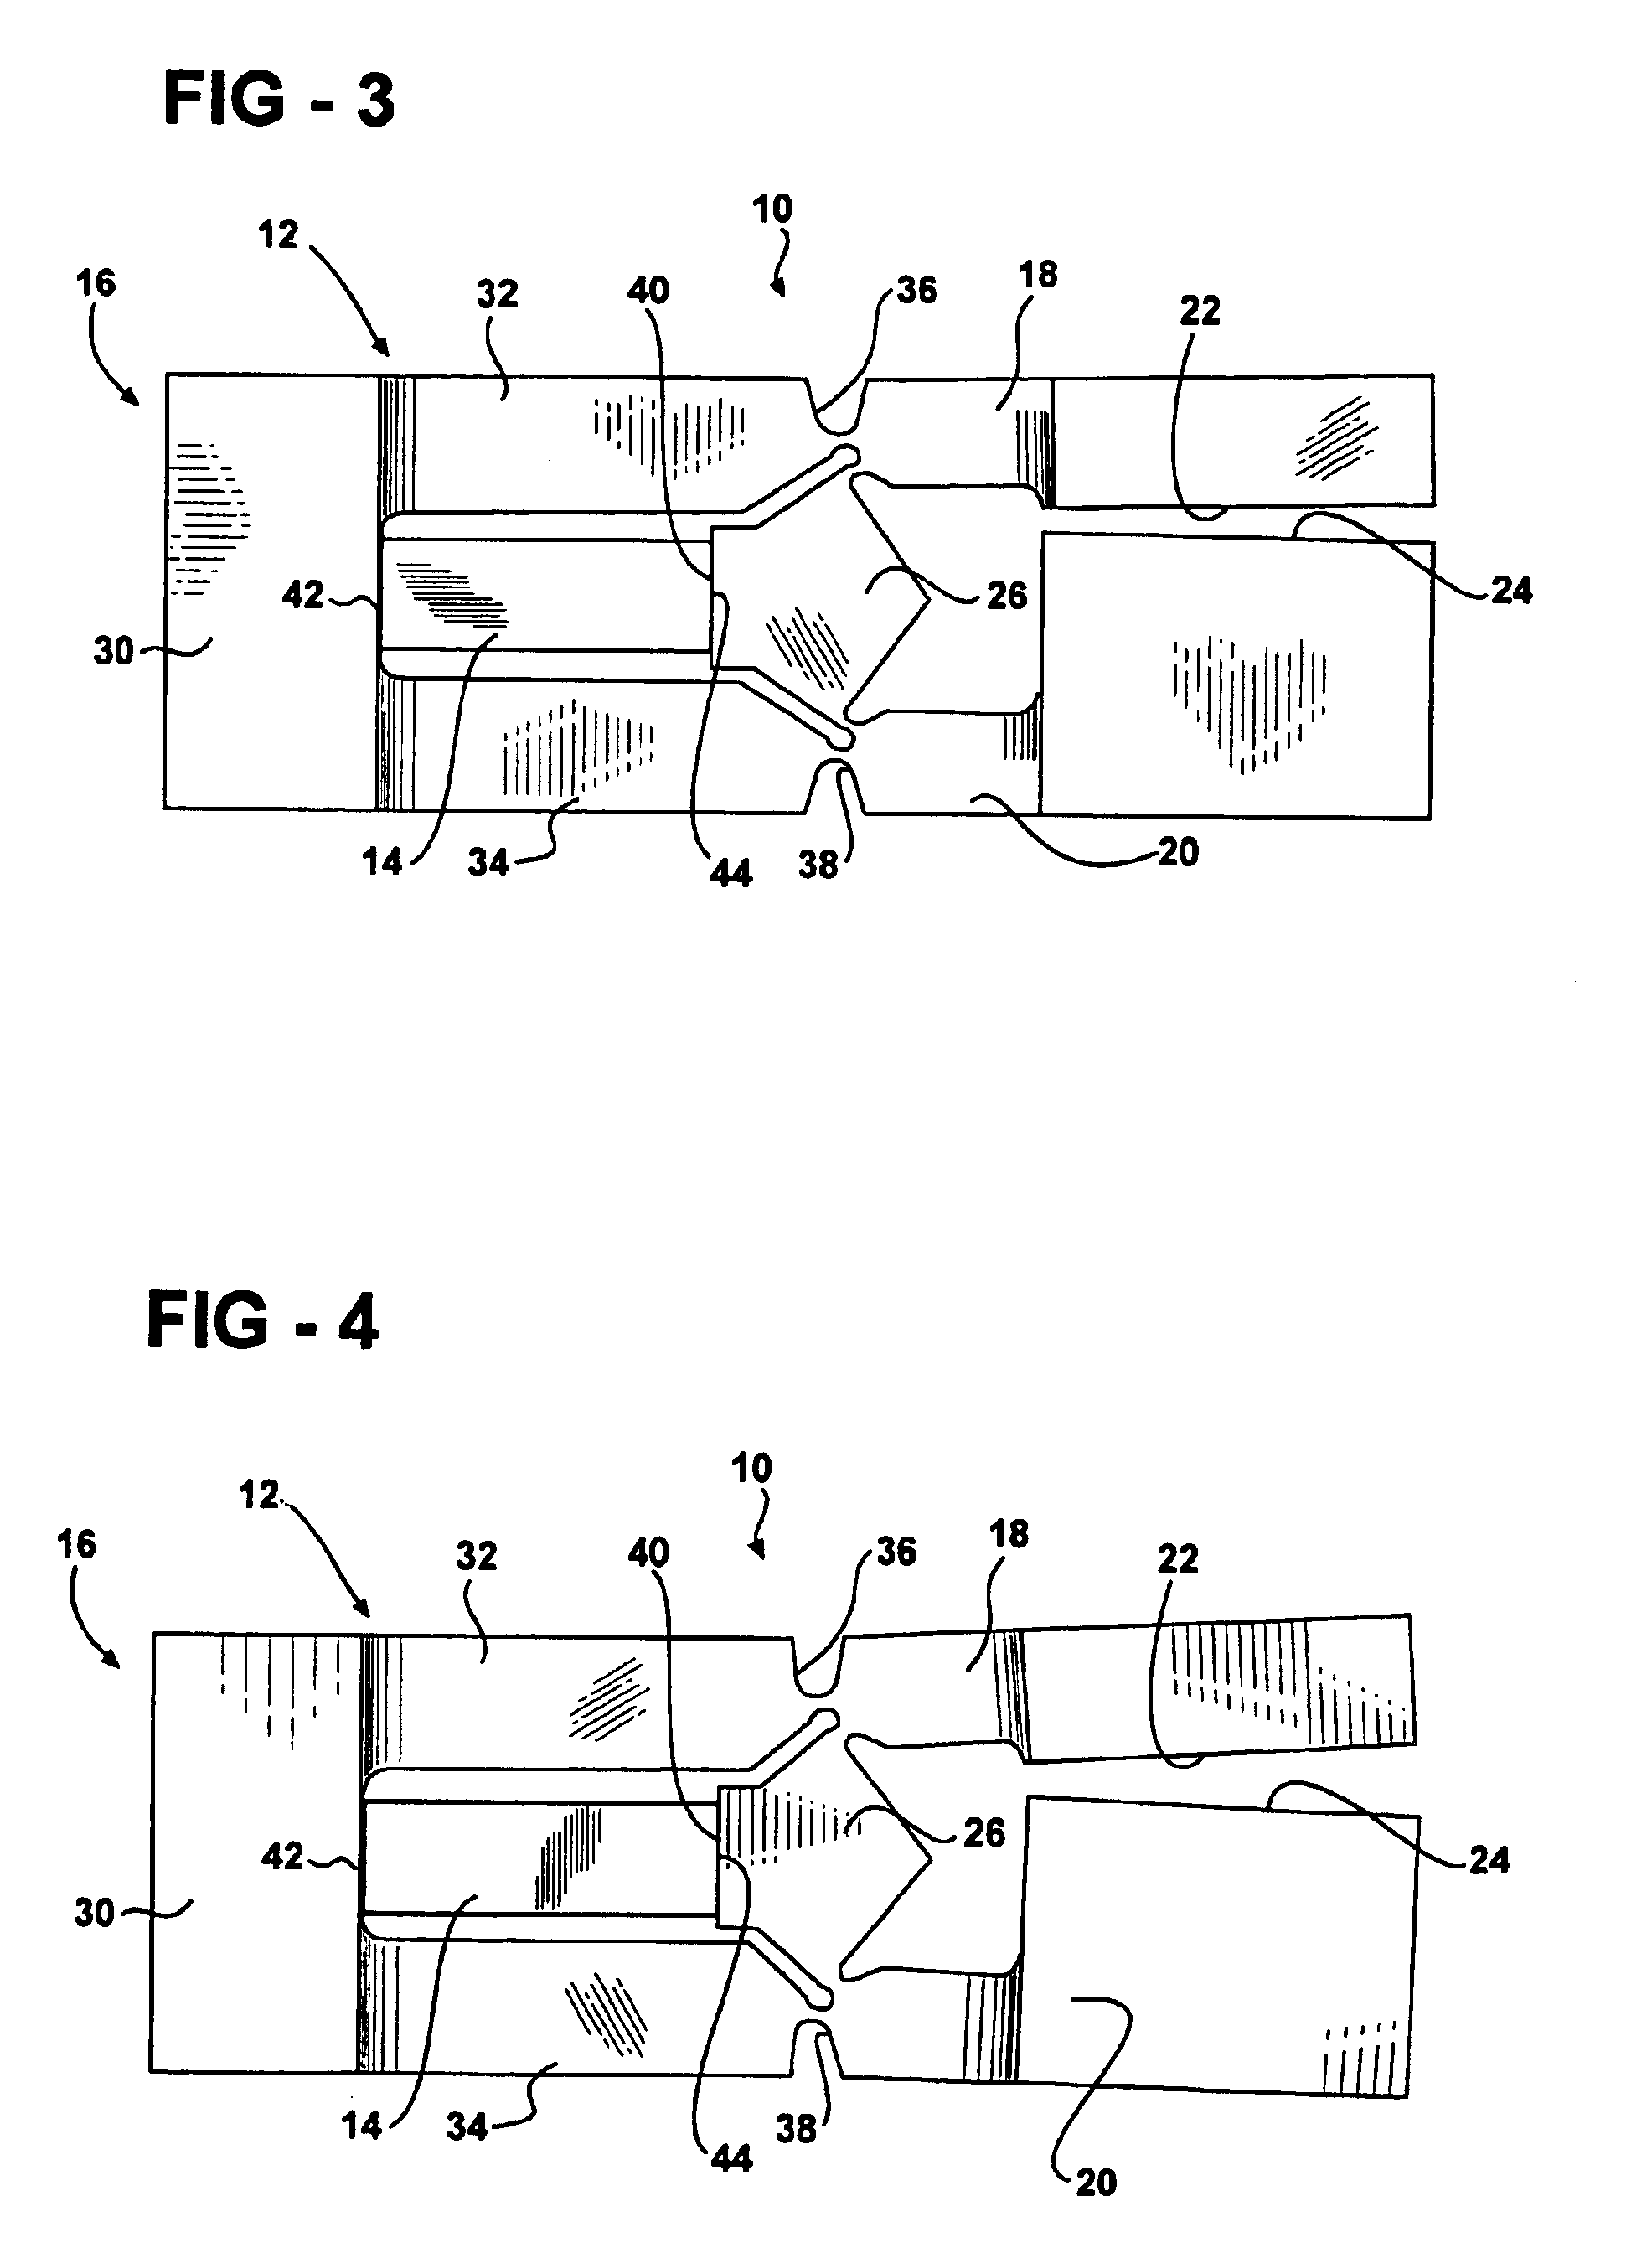 Apparatus for moving a pair of opposing surfaces in response to an electrical activation